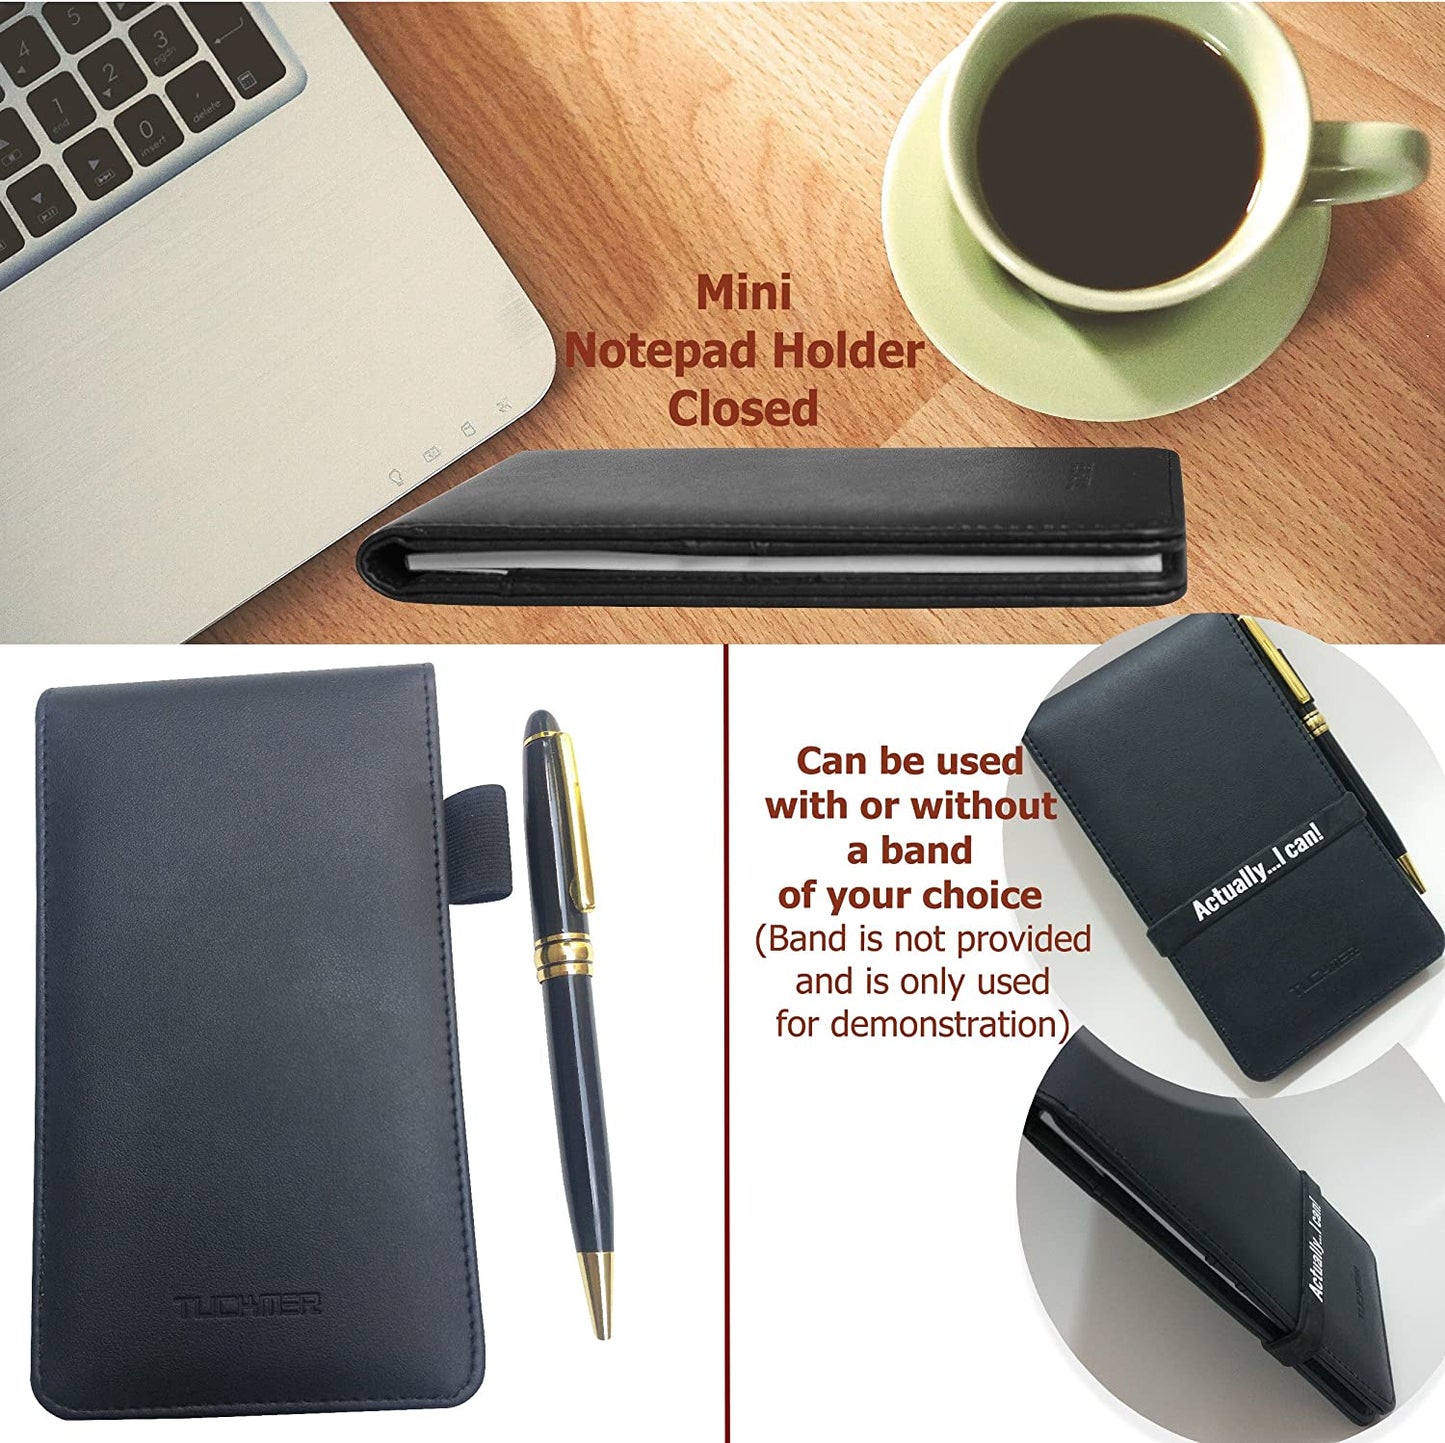 Mini Notepad Holder with Pen